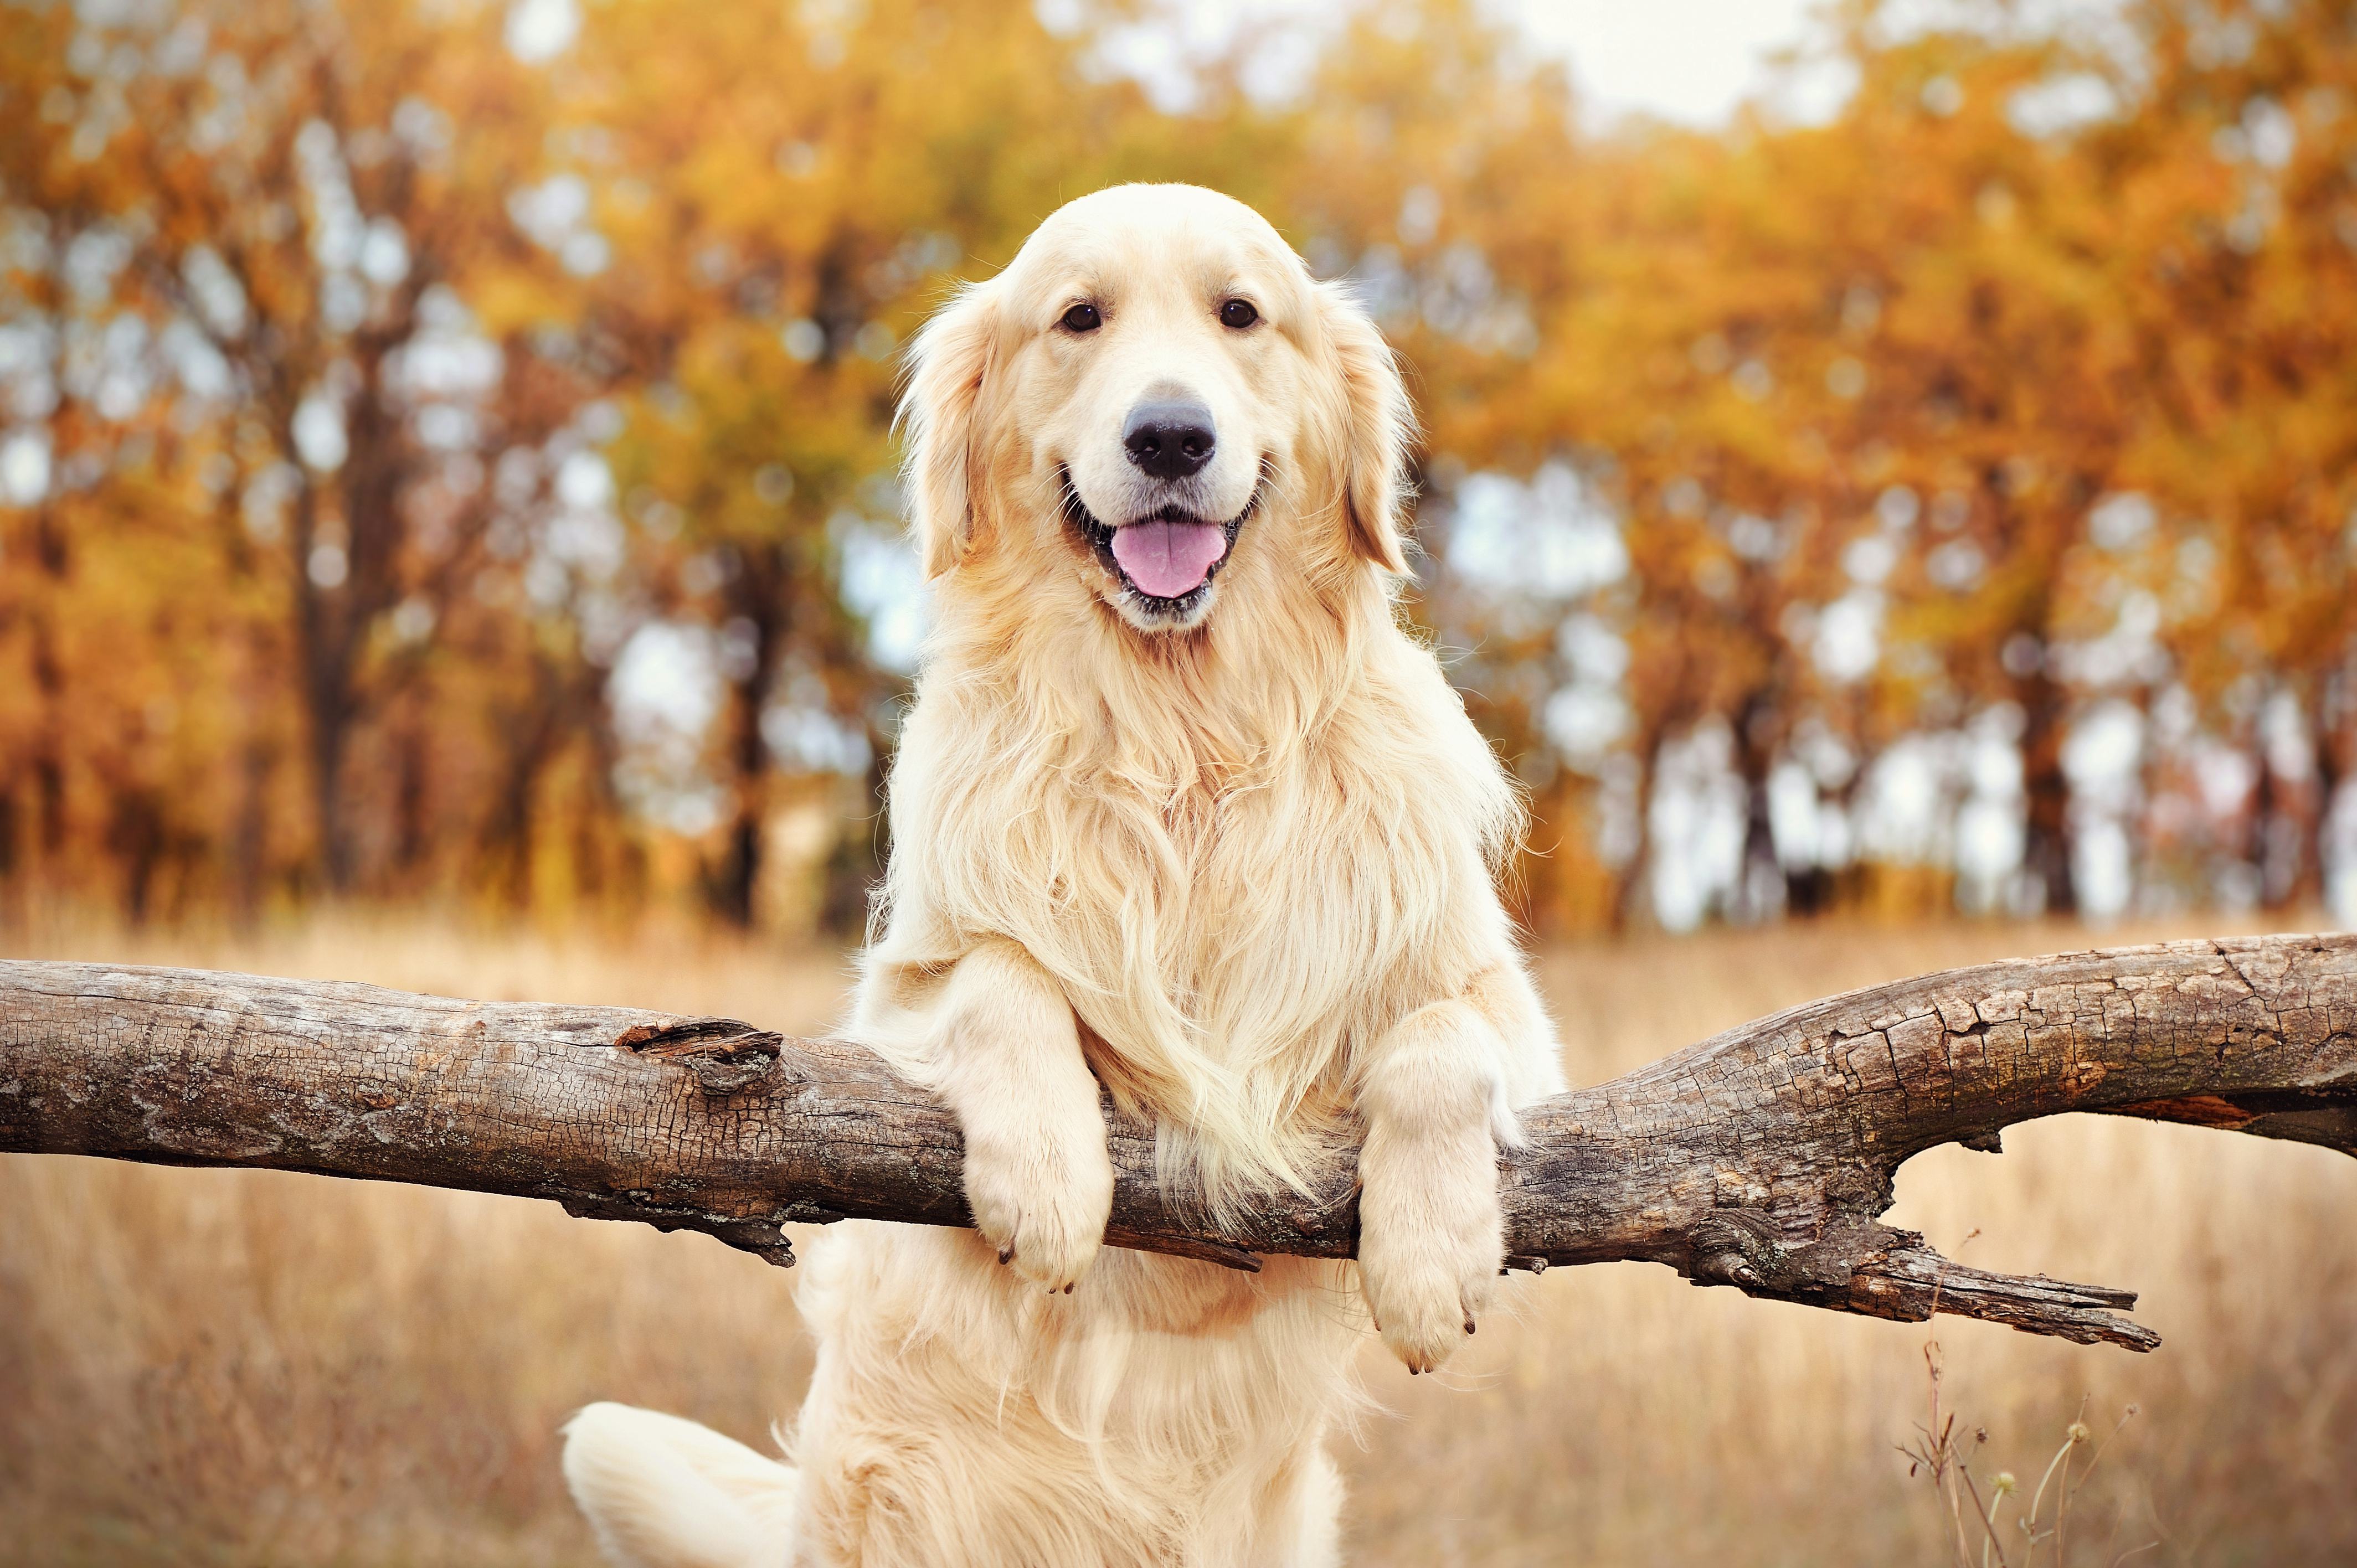 Large breed, golden retriever hanging on a branch